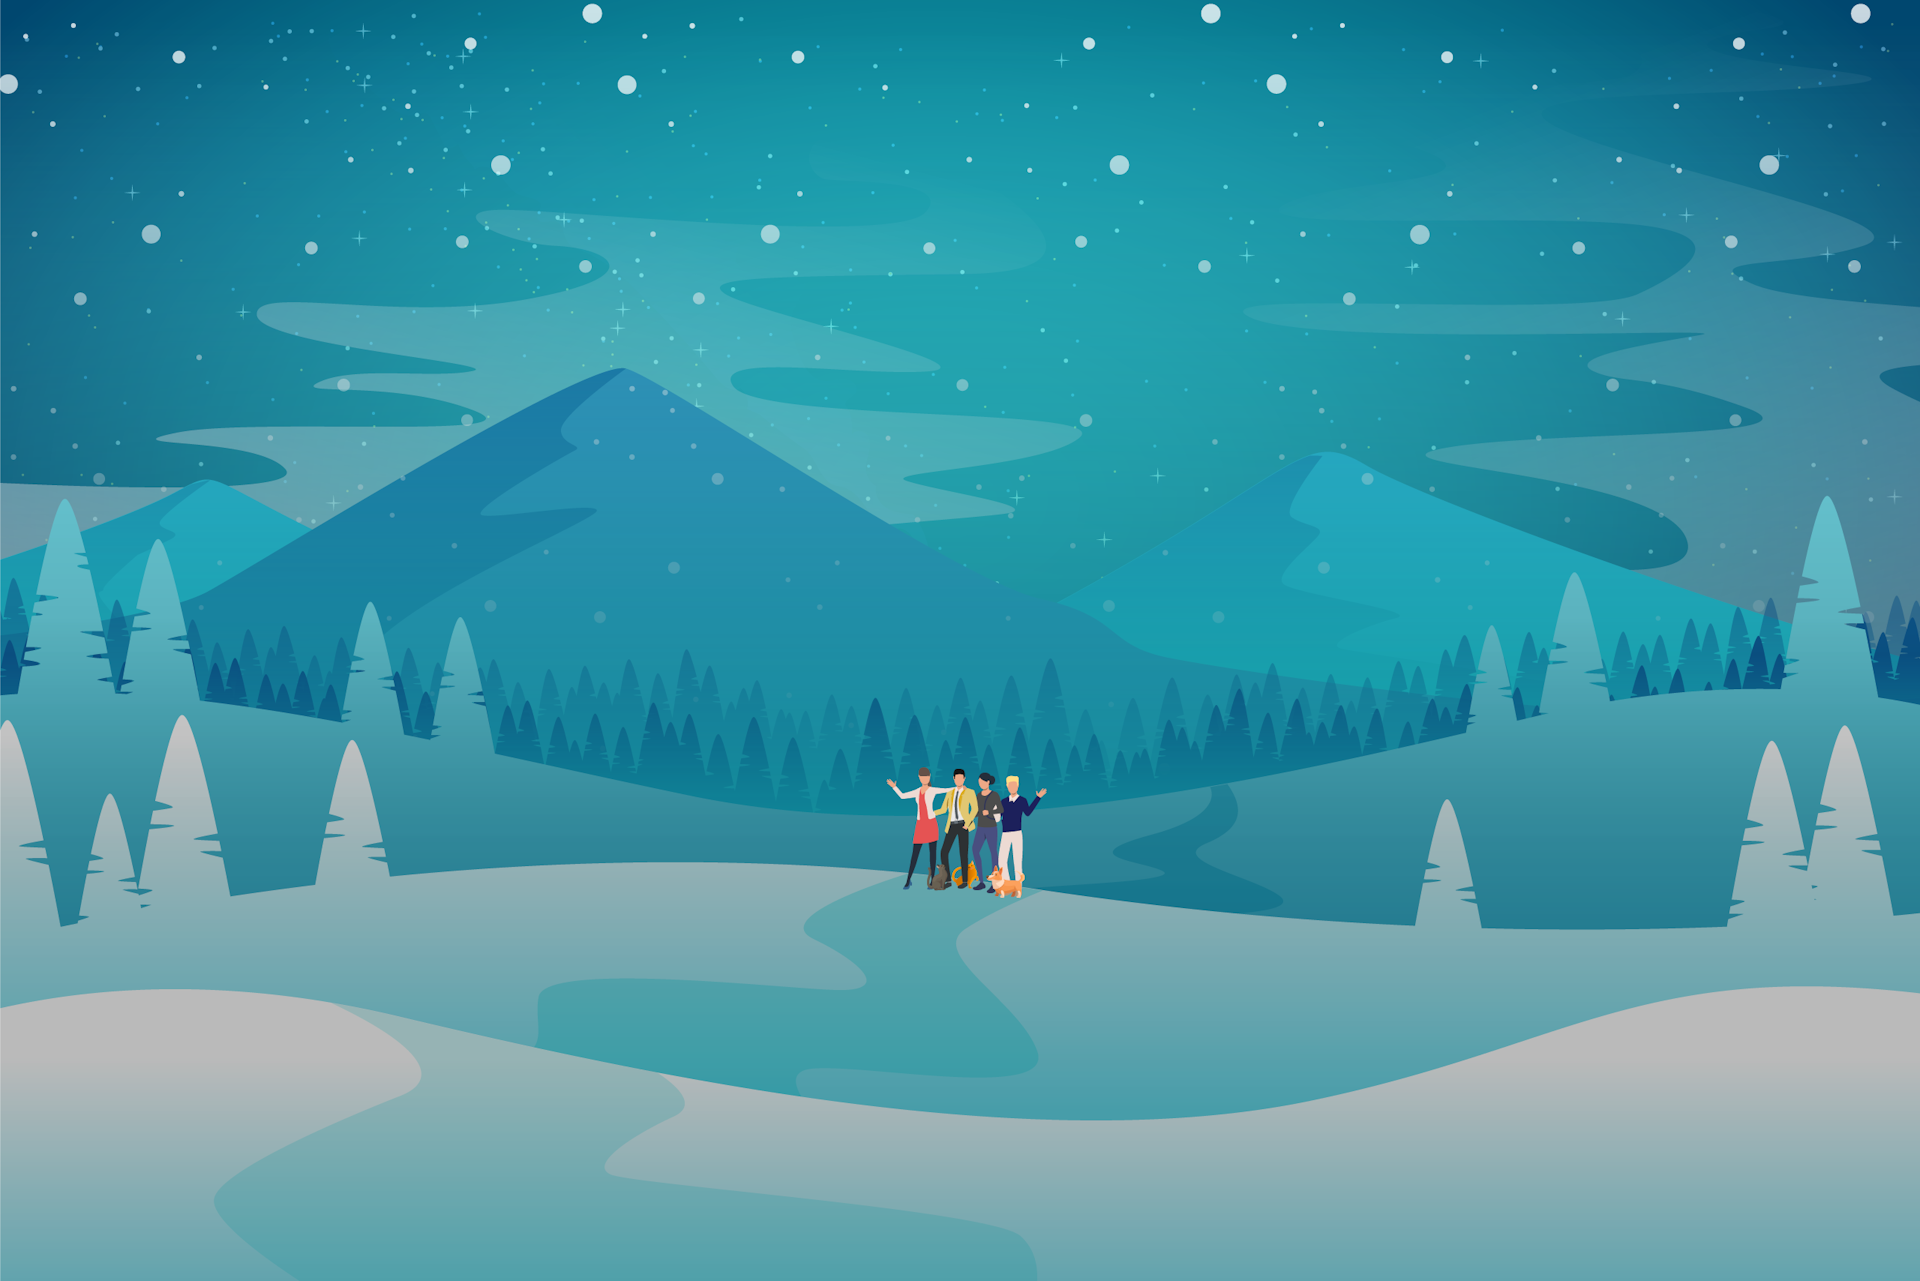 Illustration of a group of people on a snowy meadow with pine trees, with mountains in the distance and snow falling overhead.